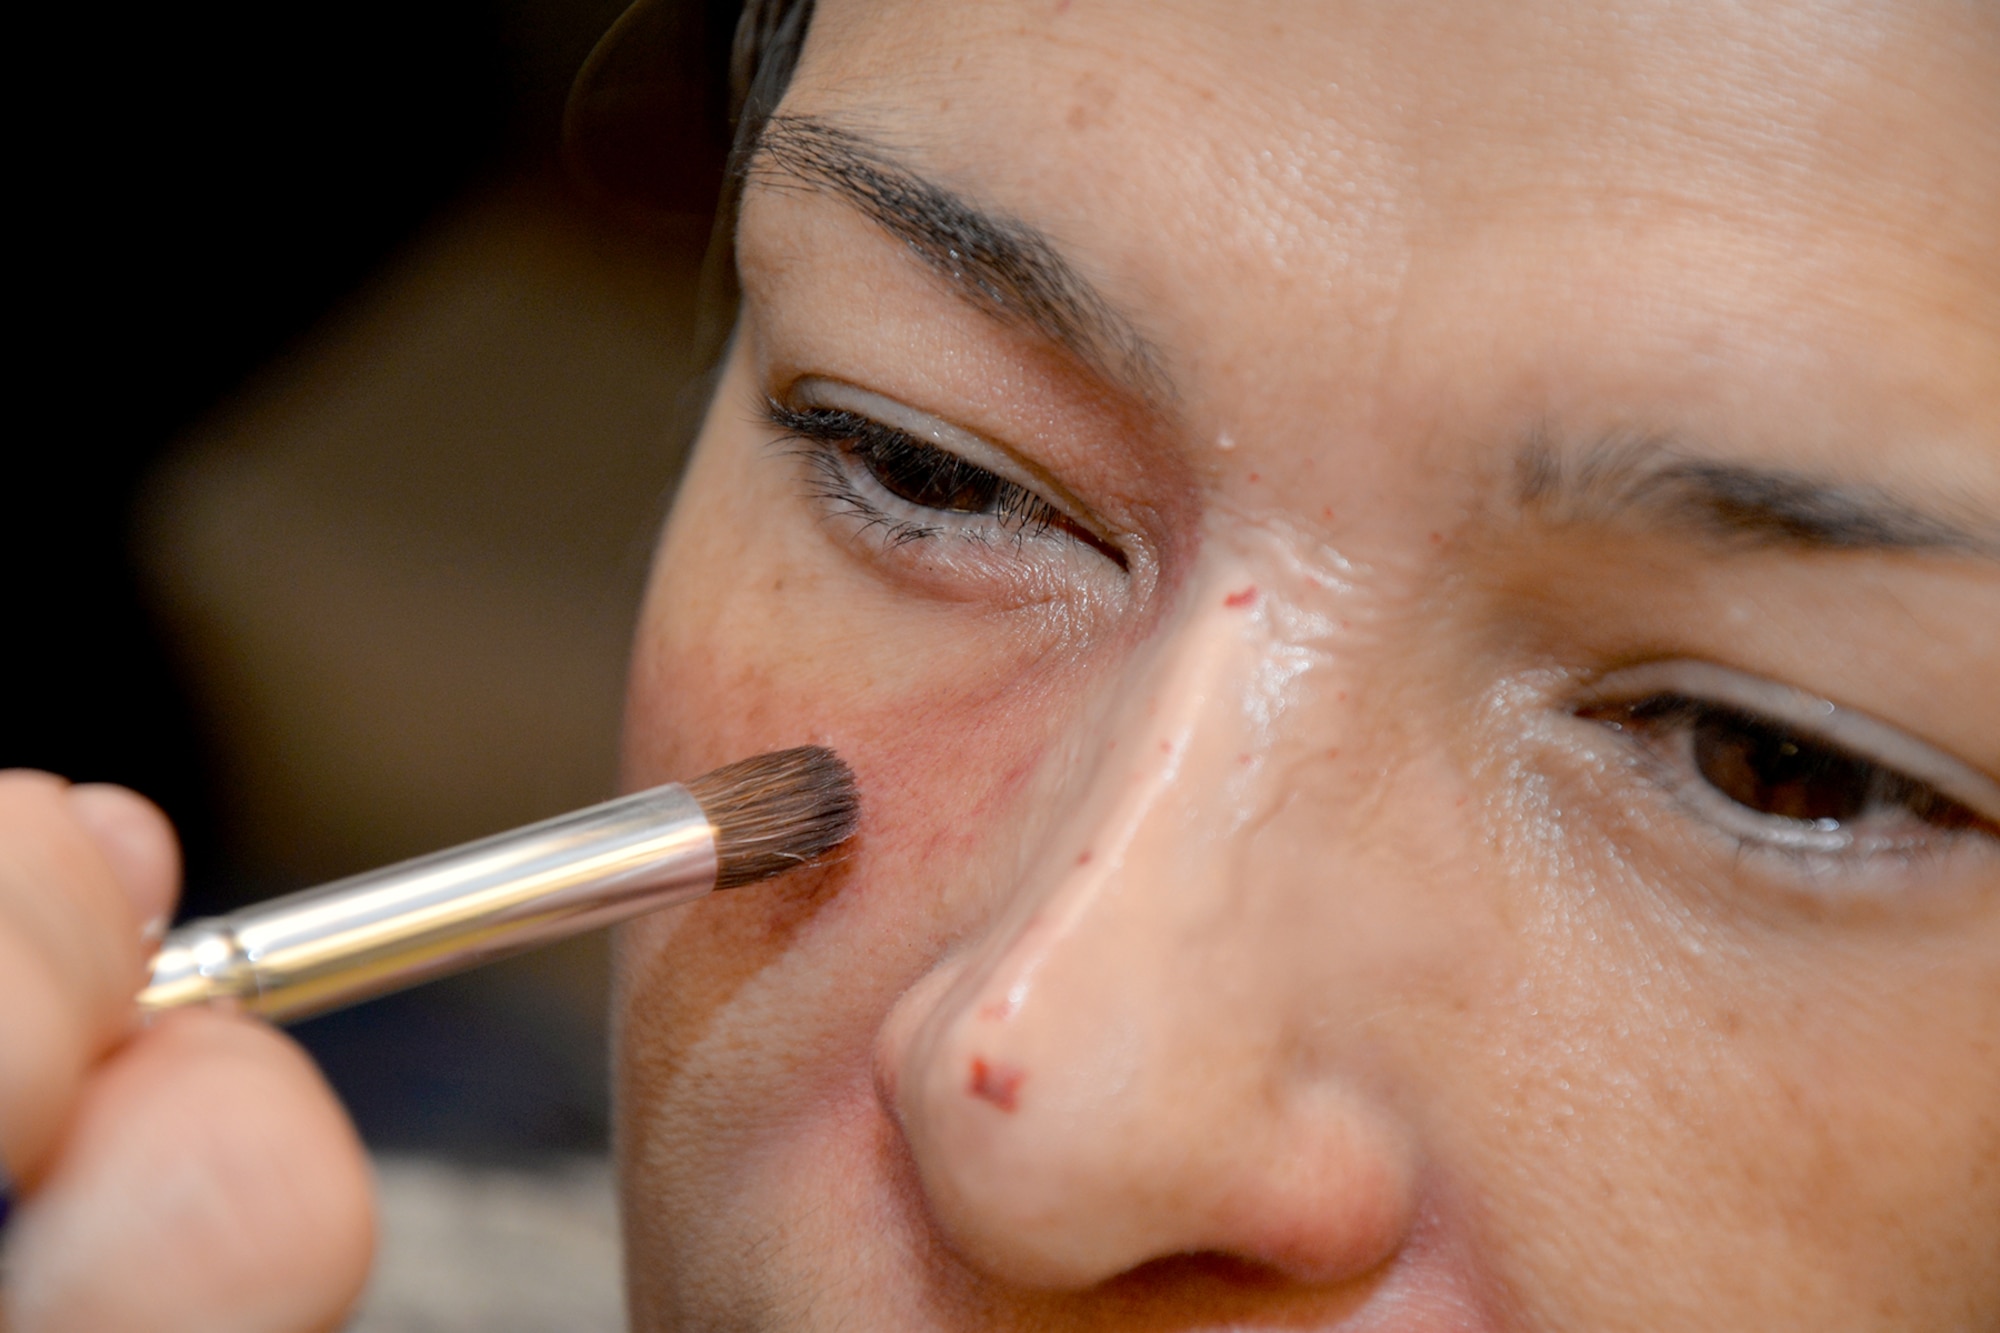 Sandra Maldanado, 17th Mission Support Group financial and computer support specialist, has moulage applied to her face during the Black Eye Campaign at Goodfellow Air Force Base, Texas, Oct. 21, 2016. Participants received mock black eyes to raise awareness of domestic abuse. (U.S. Air Force photo by Airman 1st Class Randall Moose/Released)